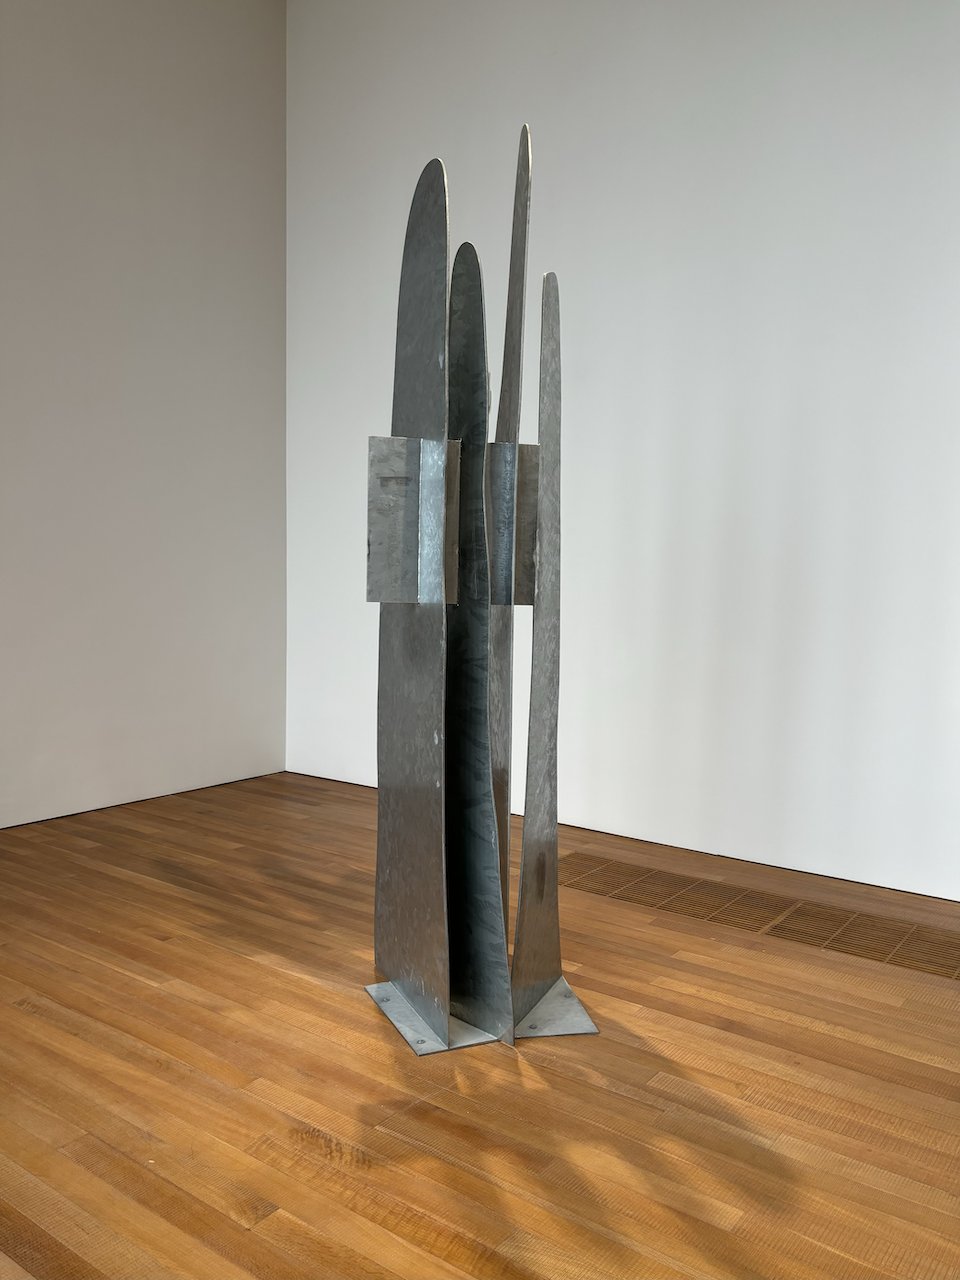 A sculpture made of four long metal sheets in light grey resembles a waterfall cascading down a hill. A rectangular panel cuts across the four metal sheets on the upper half. The sculpture stands upright with the support of another rectangular panel on the floor.